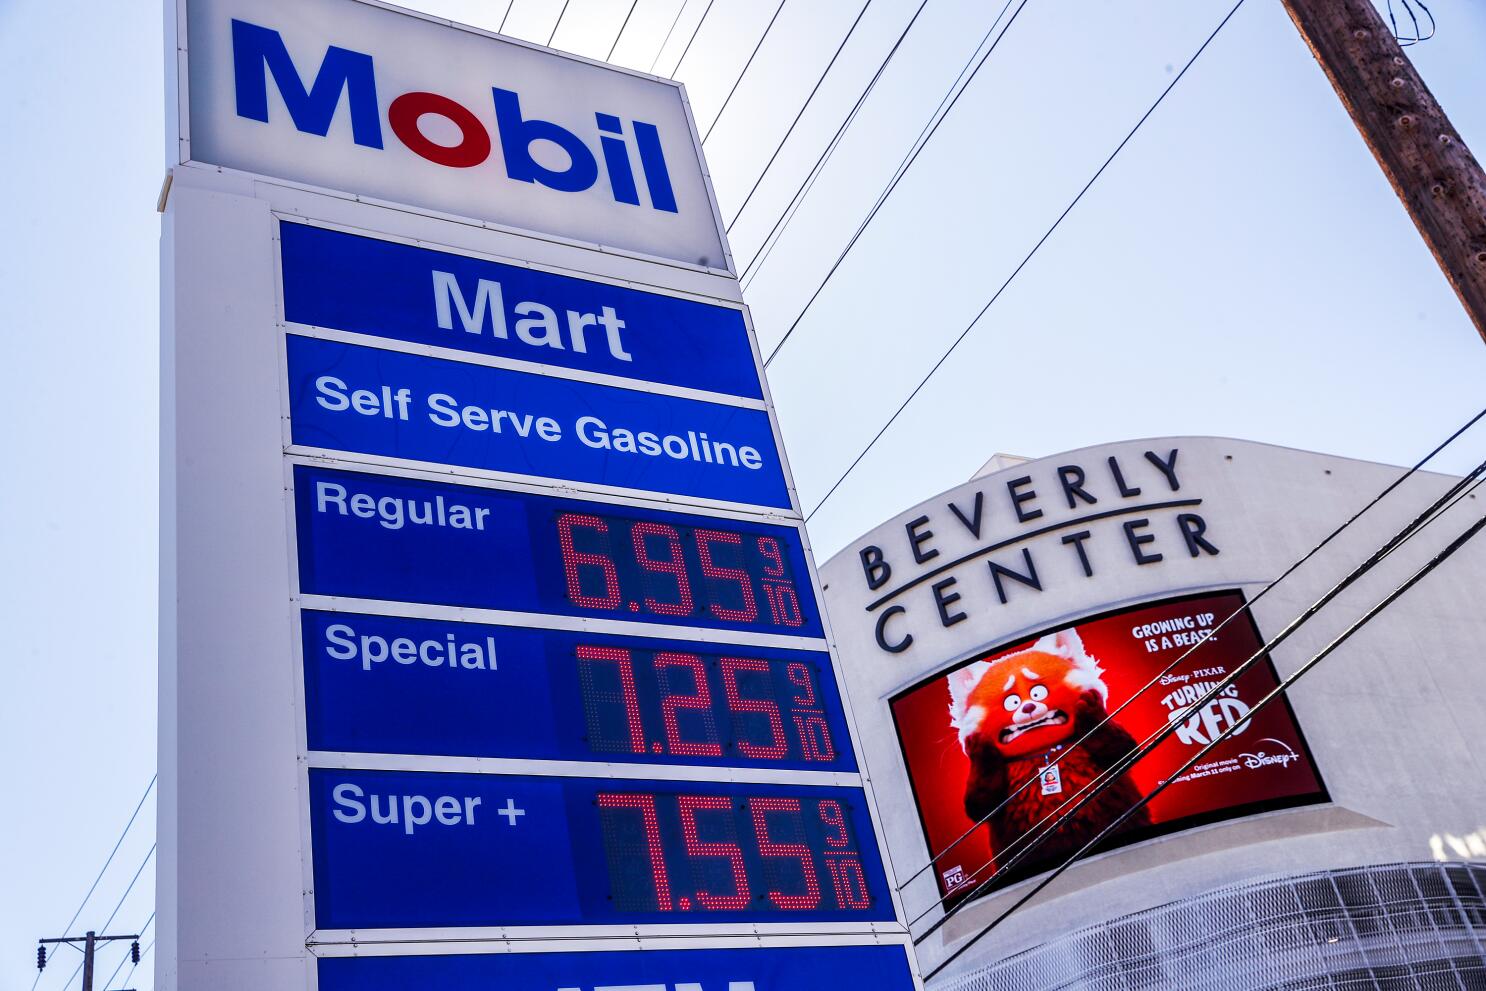 California gas prices: Who goes to L.A.'s priciest stations? - Los